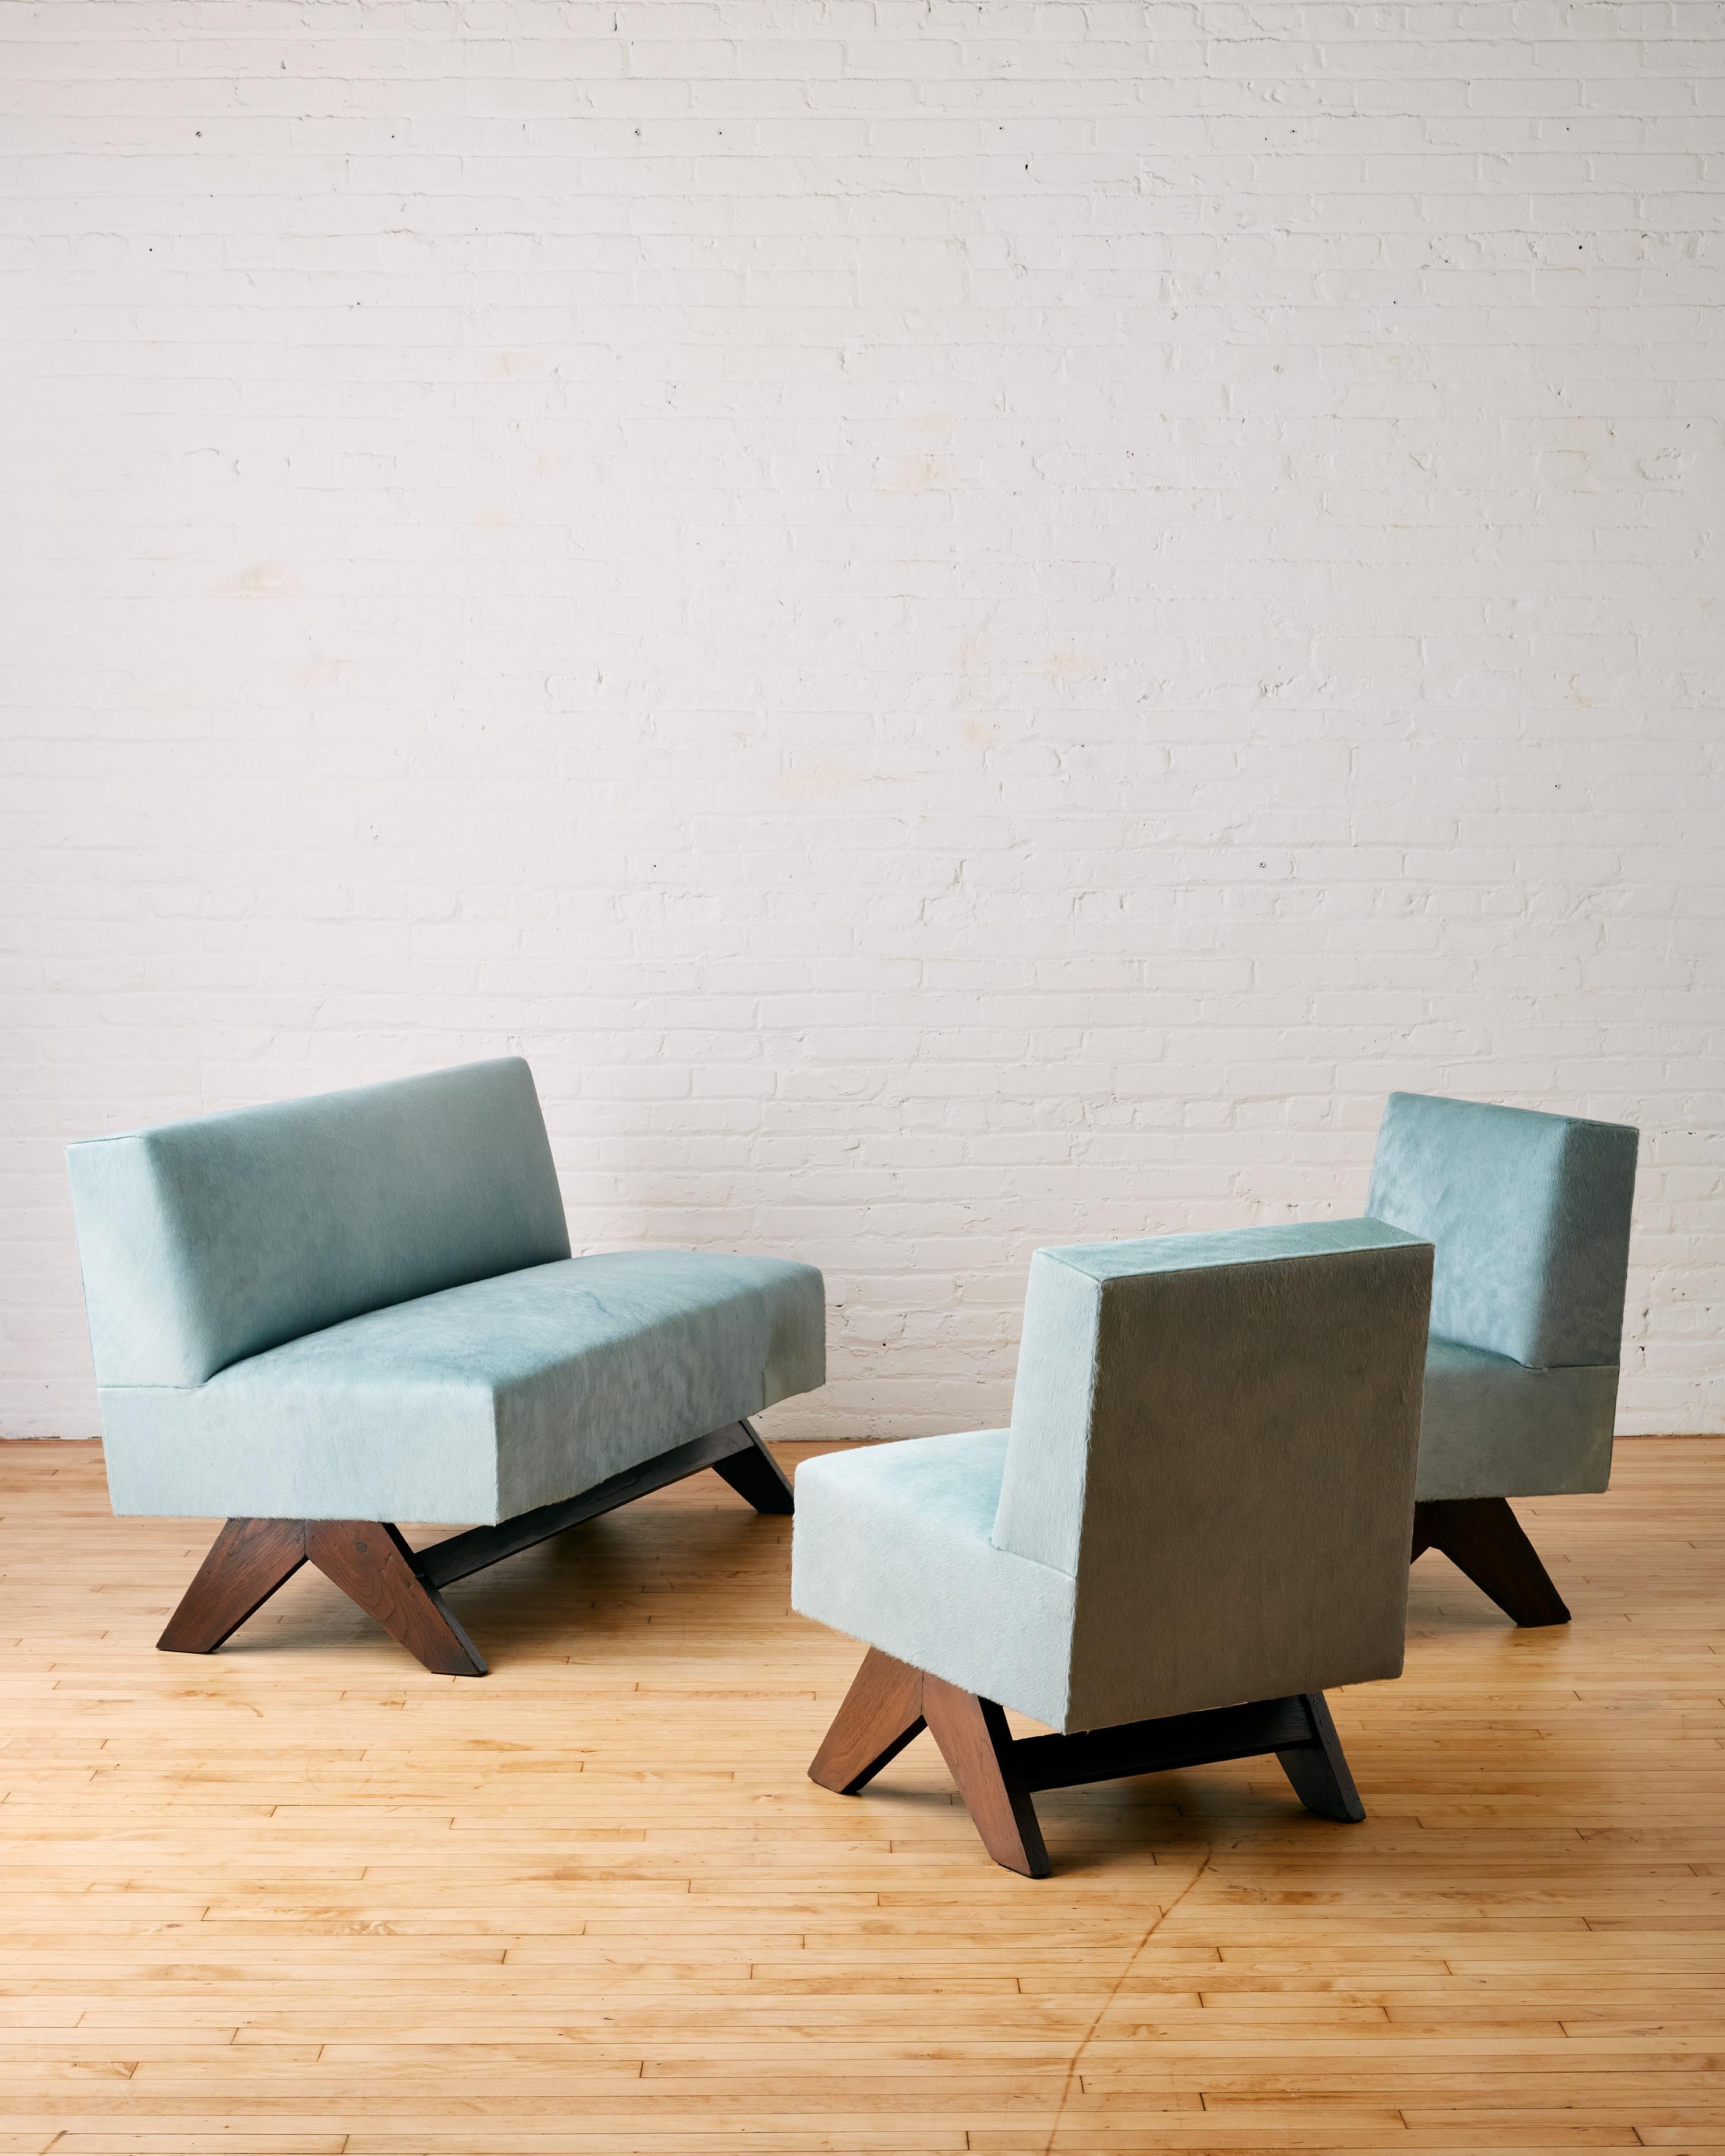 Rare Settee and Pair of Low Lounge Chairs by Pierre Jeanneret with inverted compass type teak legs upholstered in Italian sheared cow hide

The Sette and Lounge chairs have been expertly conserved by MS, New York. Seat interior has been refurbished,